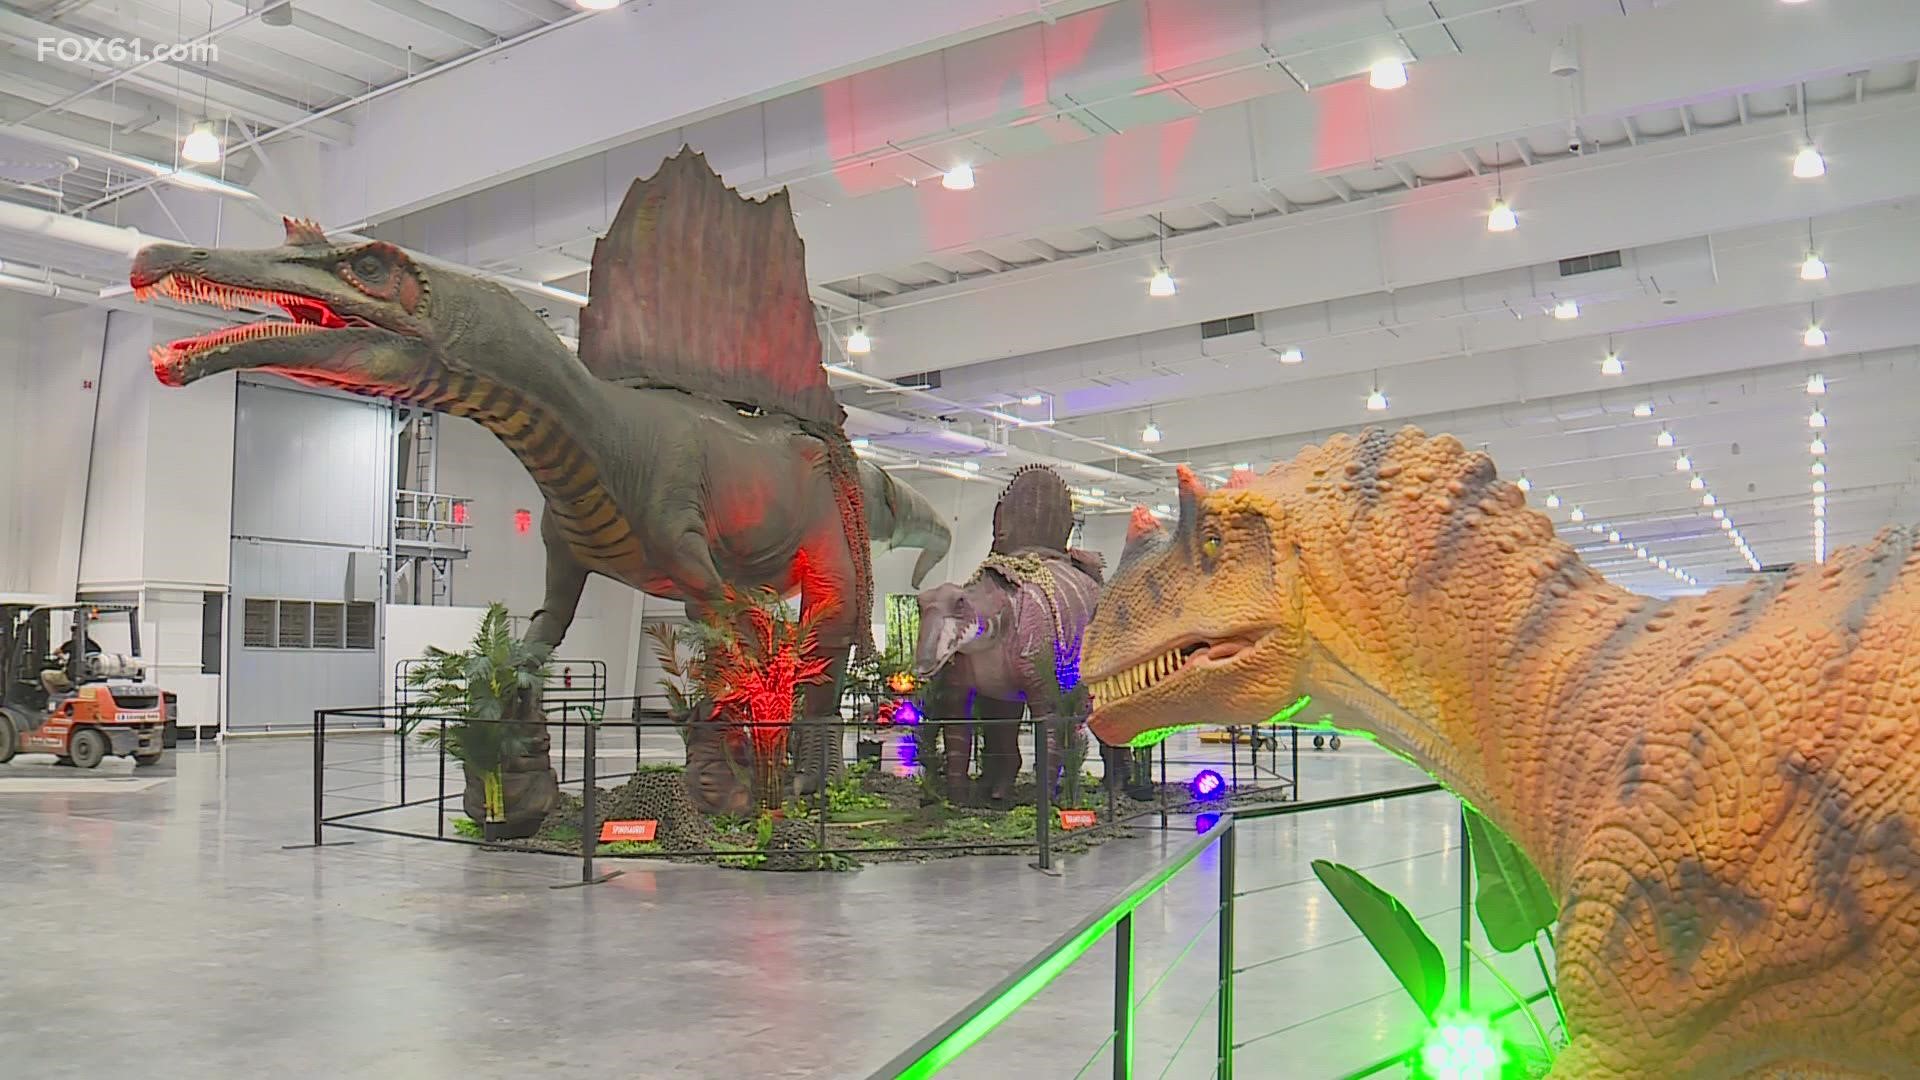 Jurassic Quest has come to Mohegan Sun for a three-day run where the animatronics bring the super-sized dinosaurs to life.